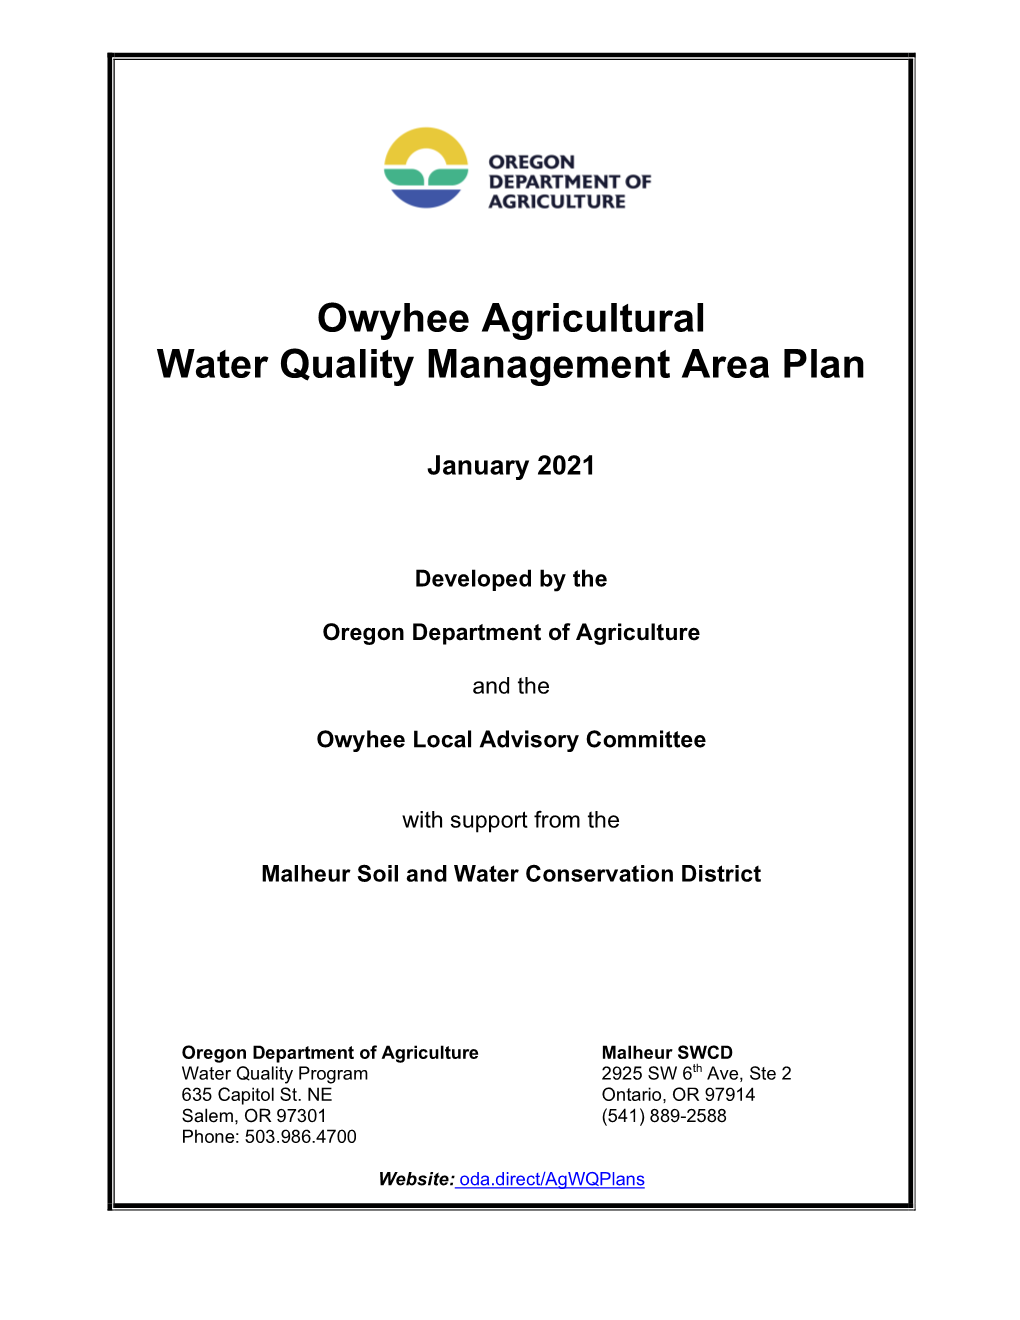 Owyhee Agricultural Water Quality Management Area Plan